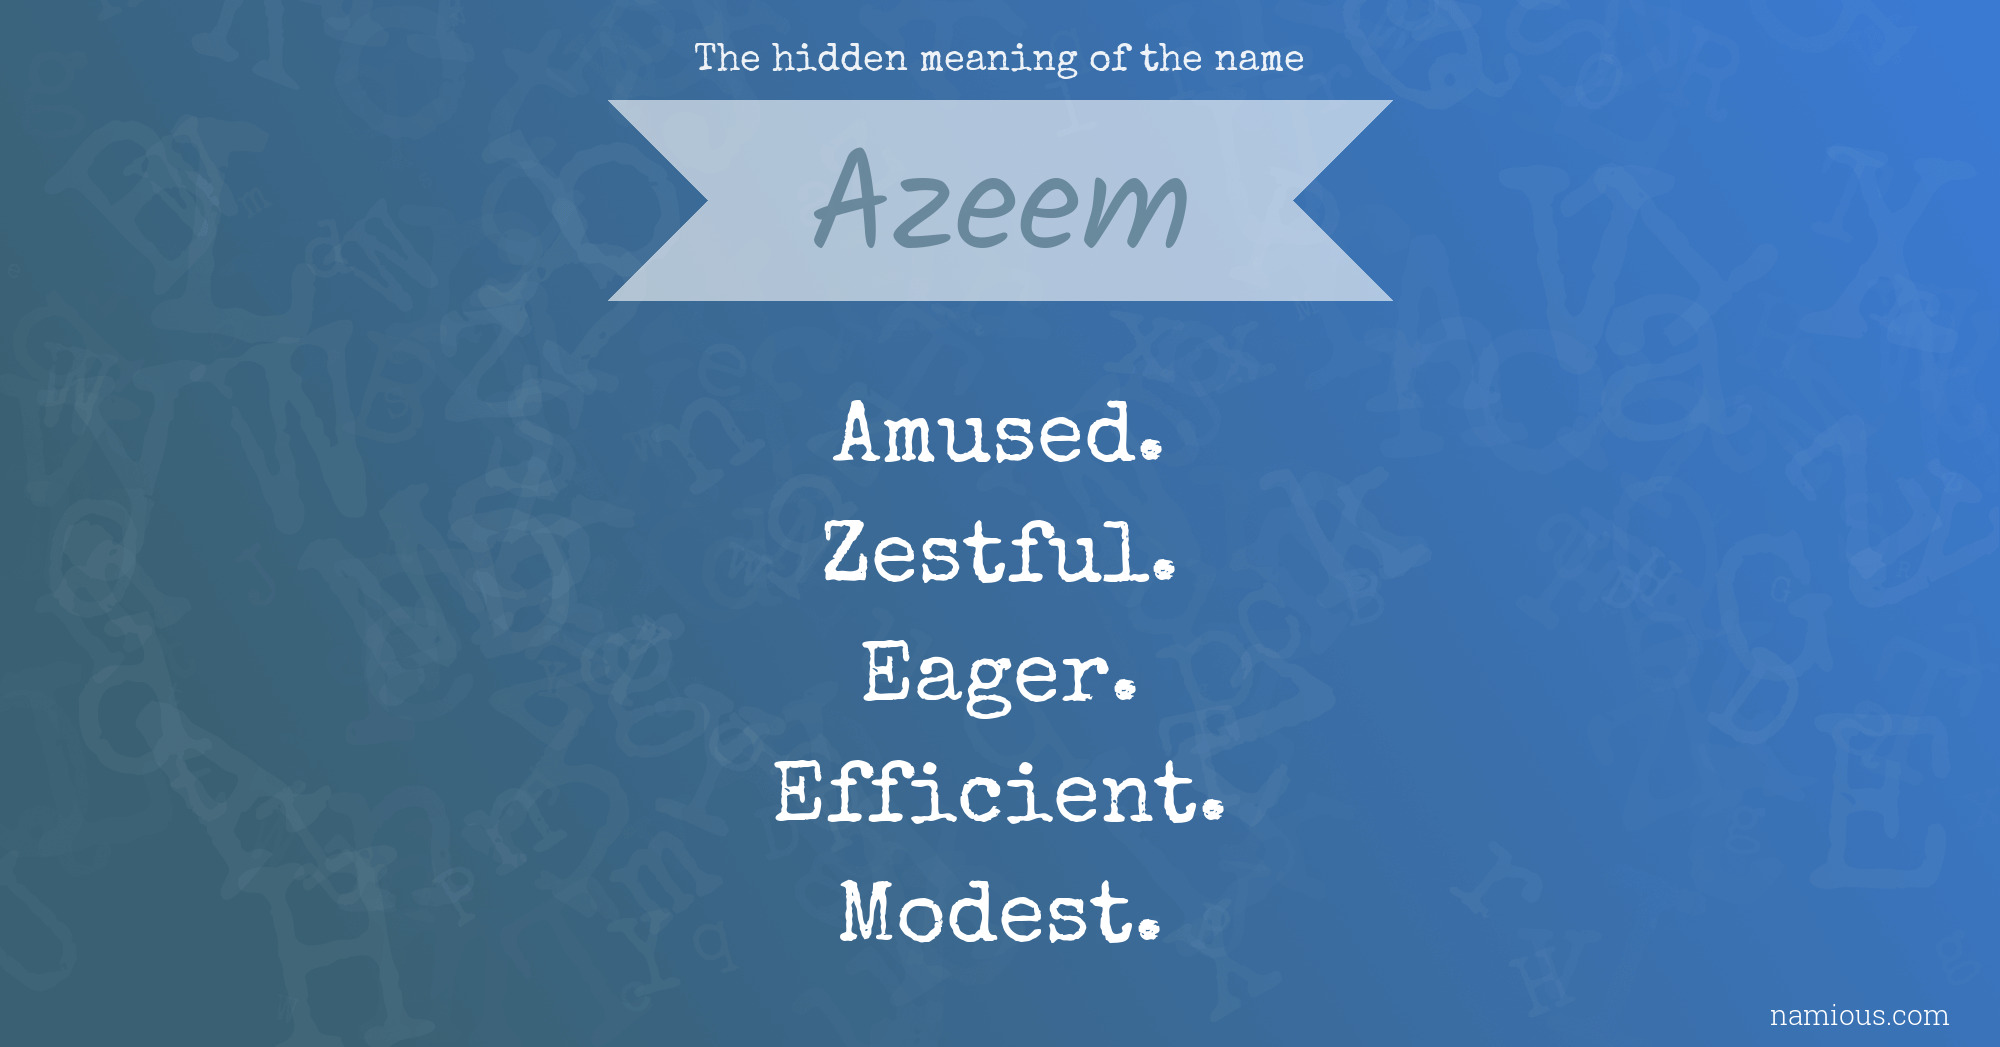 The hidden meaning of the name Azeem